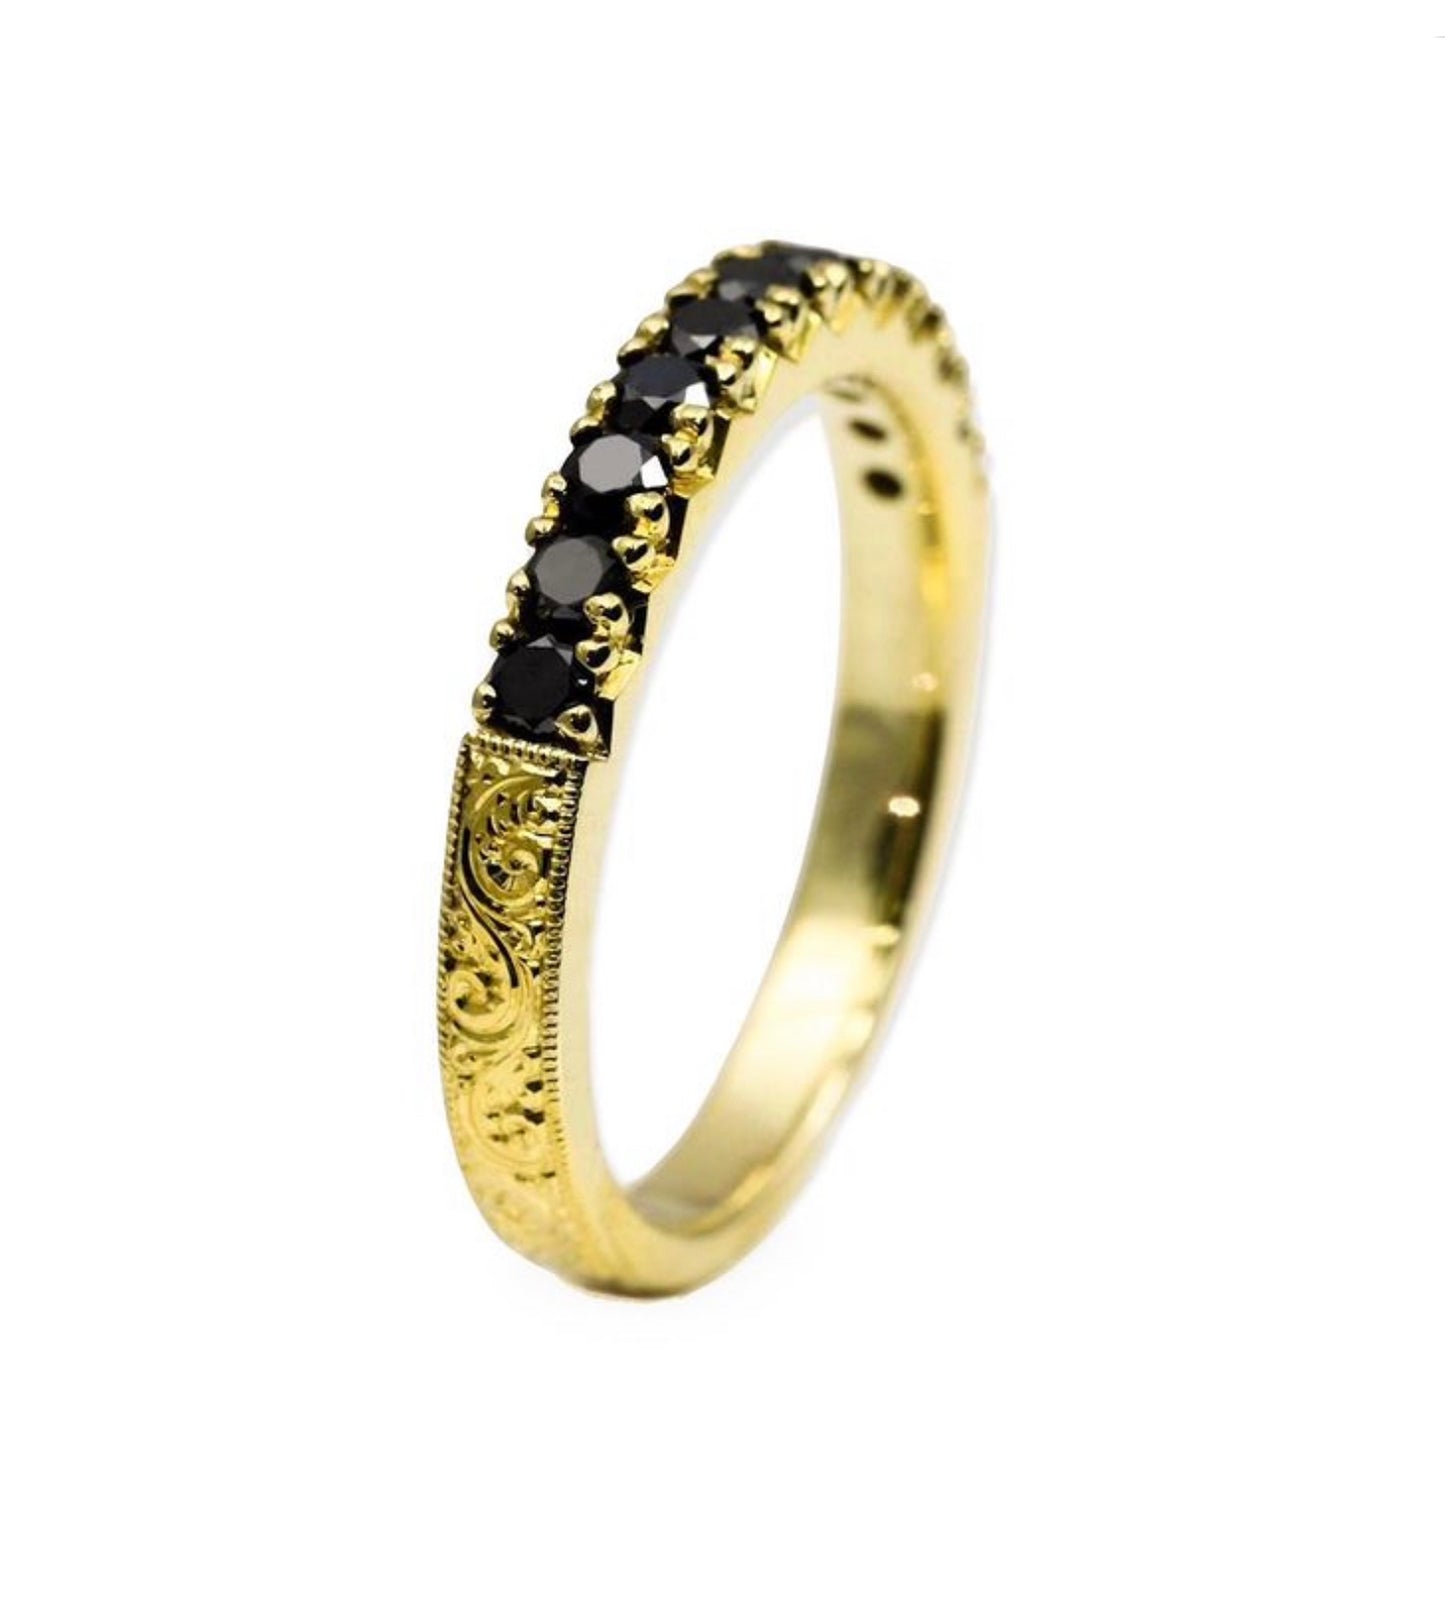 11 Stone French Pave Black Diamond Band with Milgrain on Edges and Hand Engraving on Shank